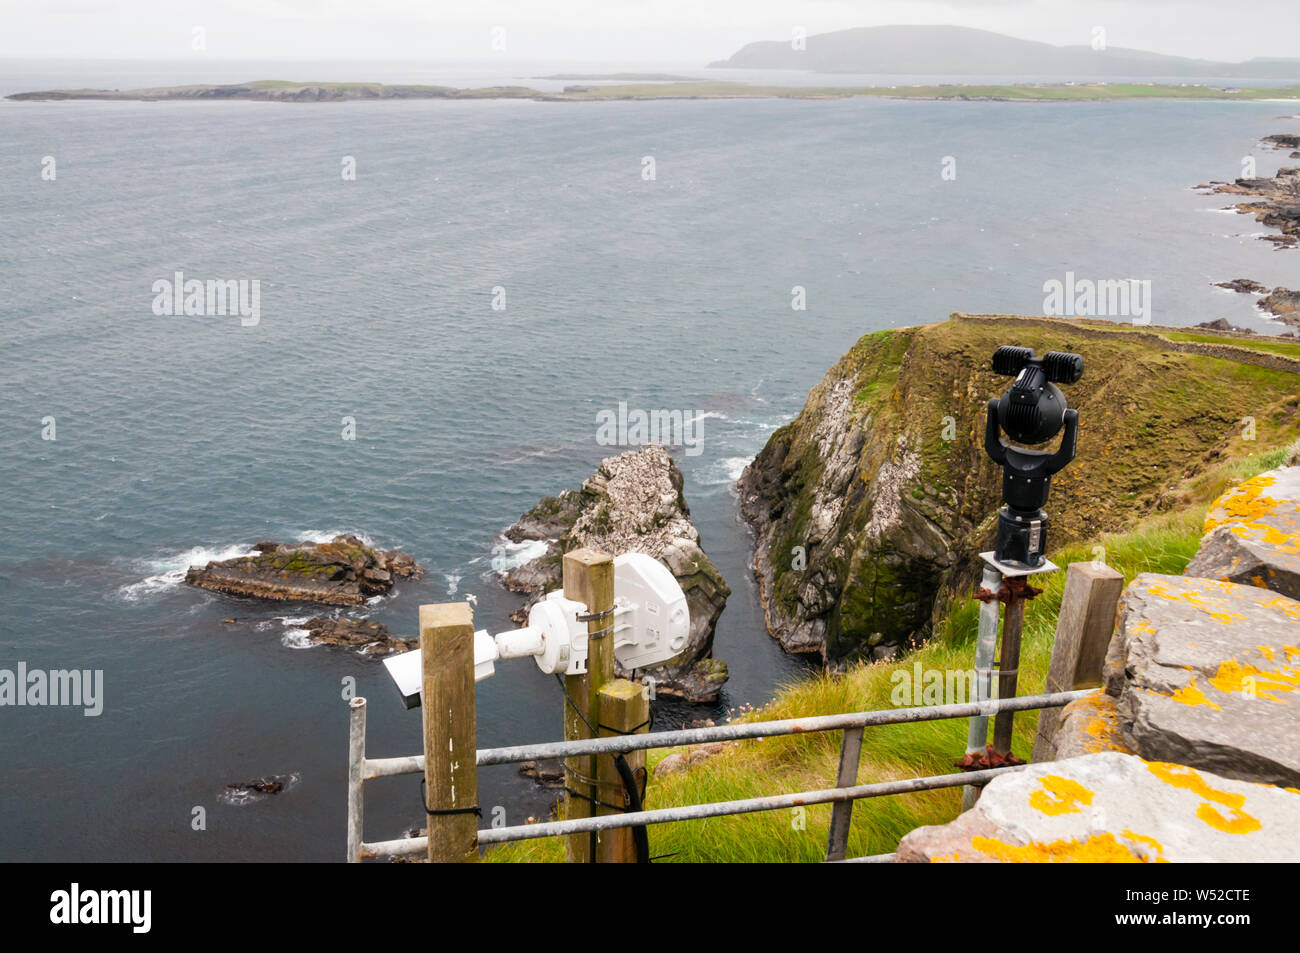 Webcam and microphone setup at Sumburgh head in Shetland to broadcast film of seabirds over the internet. Stock Photo